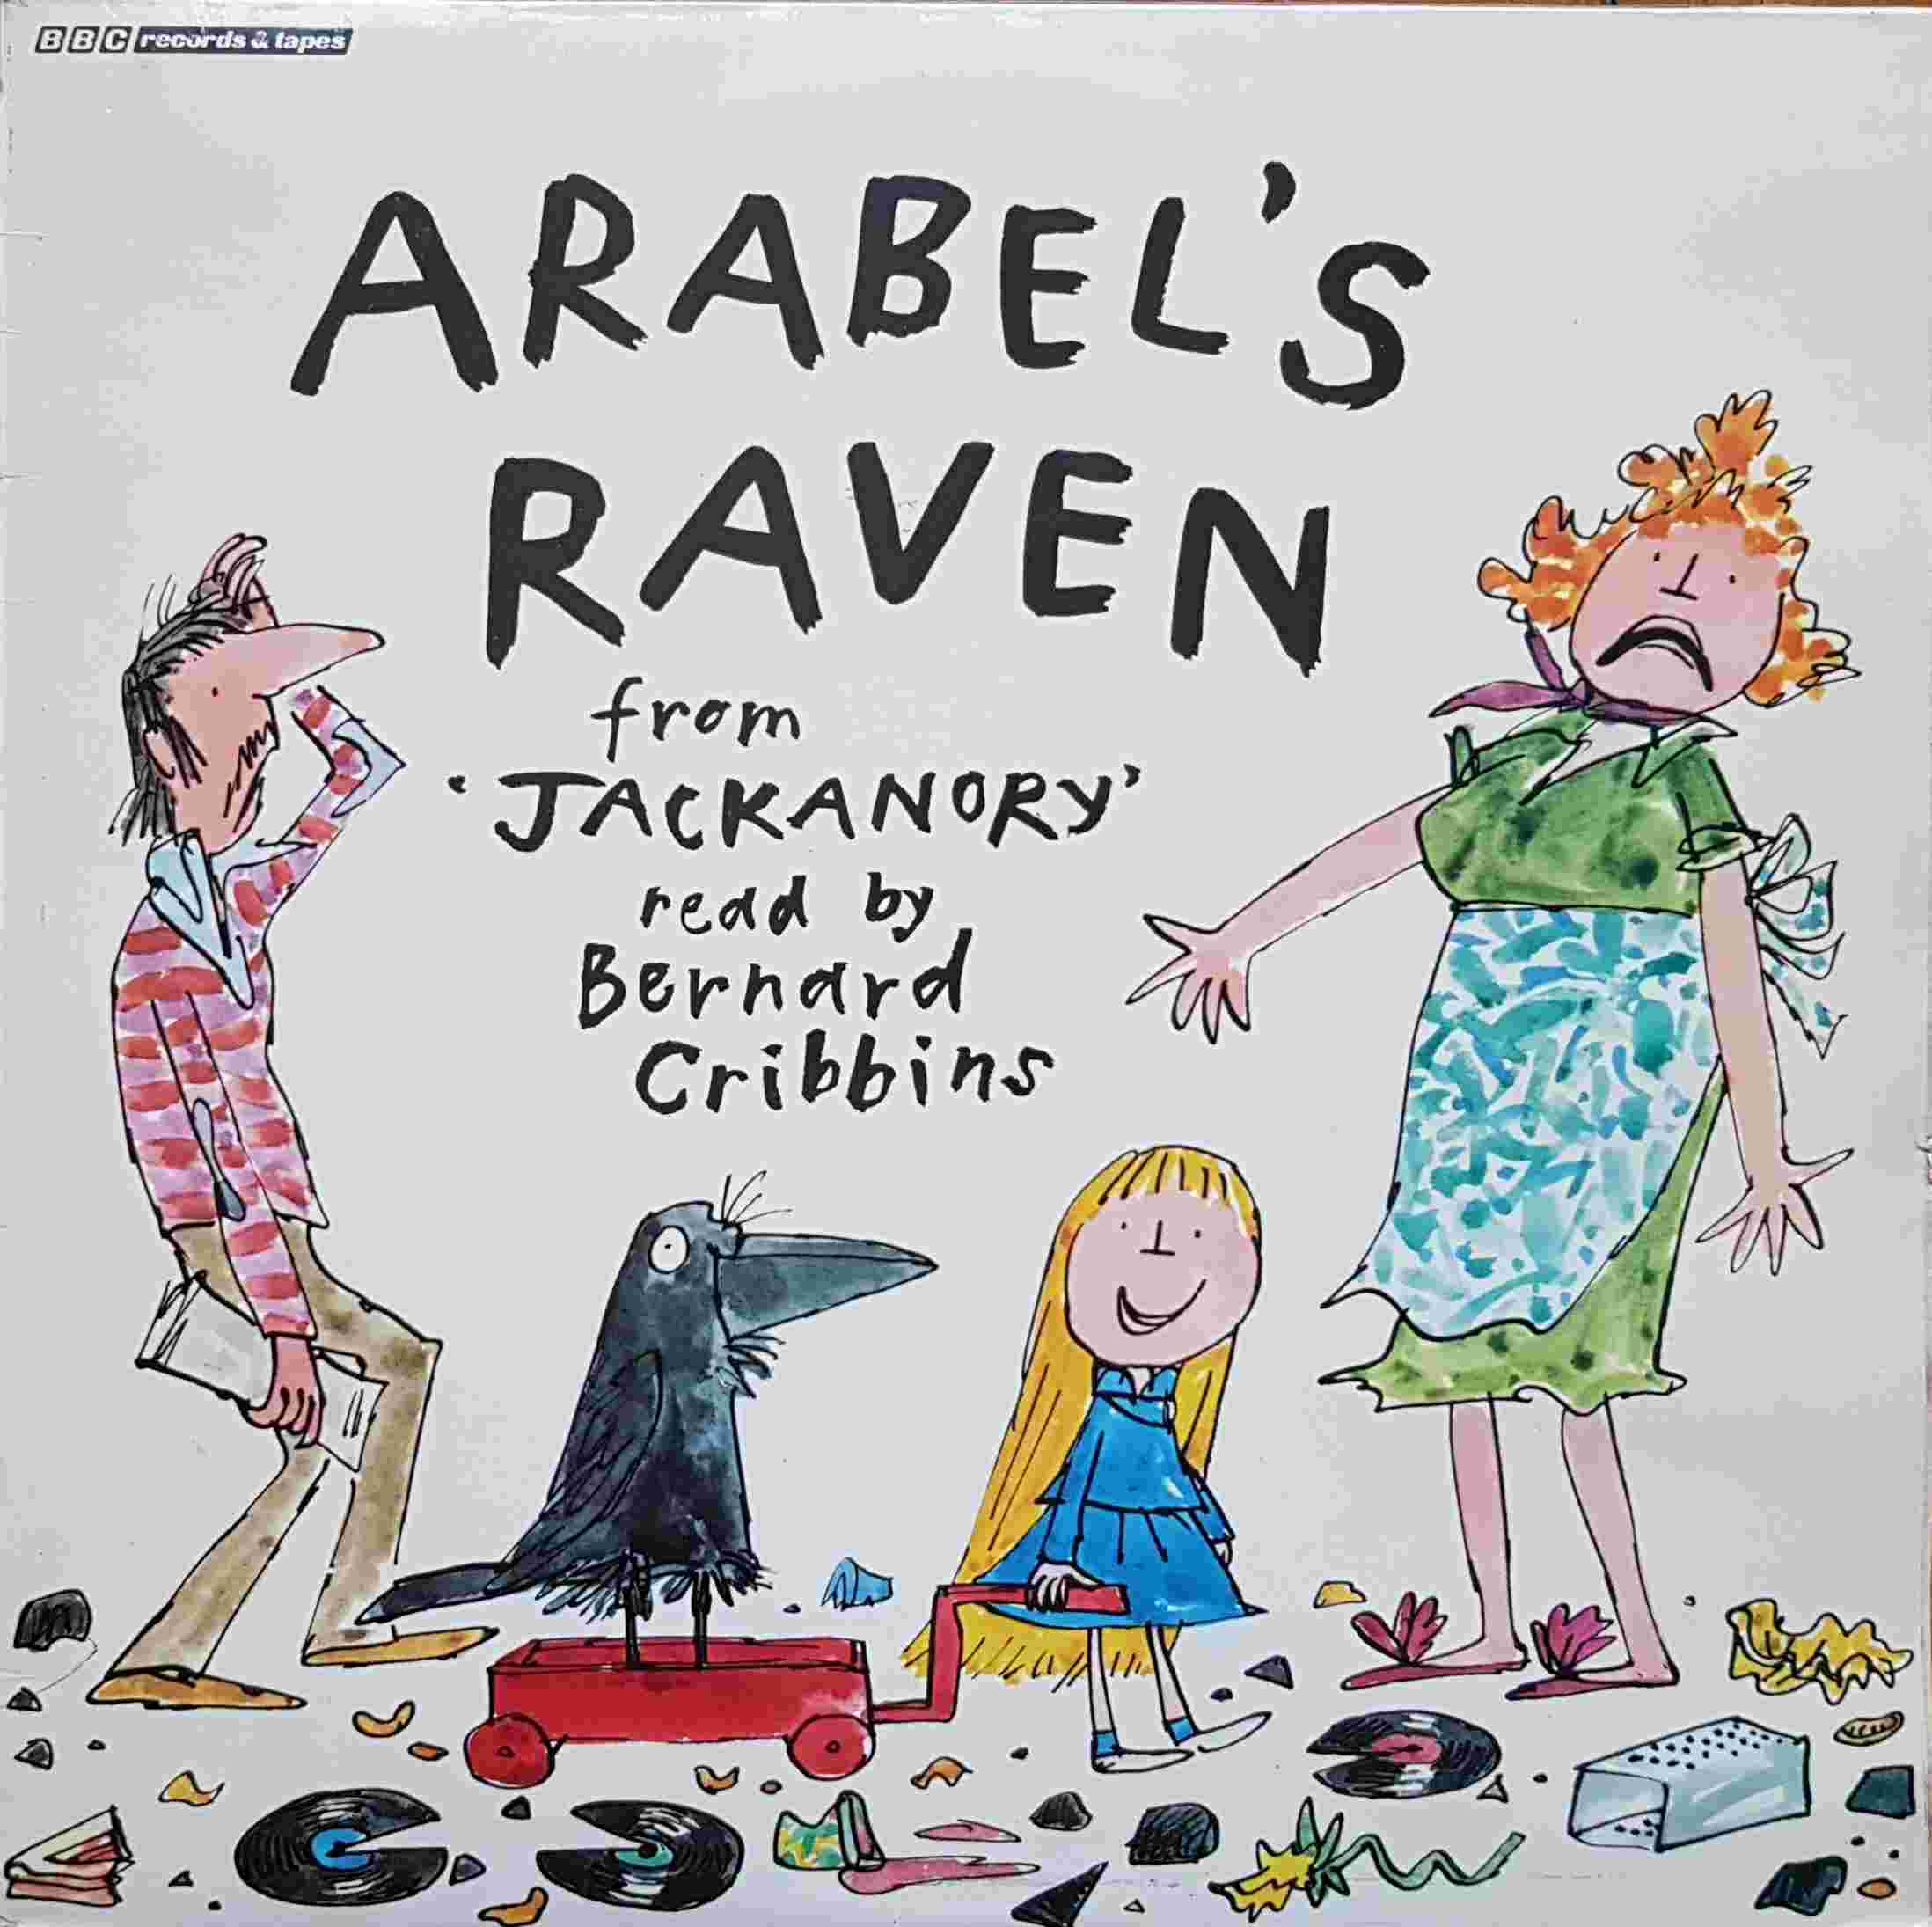 Picture of REC 292 Jackanory - Arabel's raven by artist Bernard Cribbins from the BBC albums - Records and Tapes library